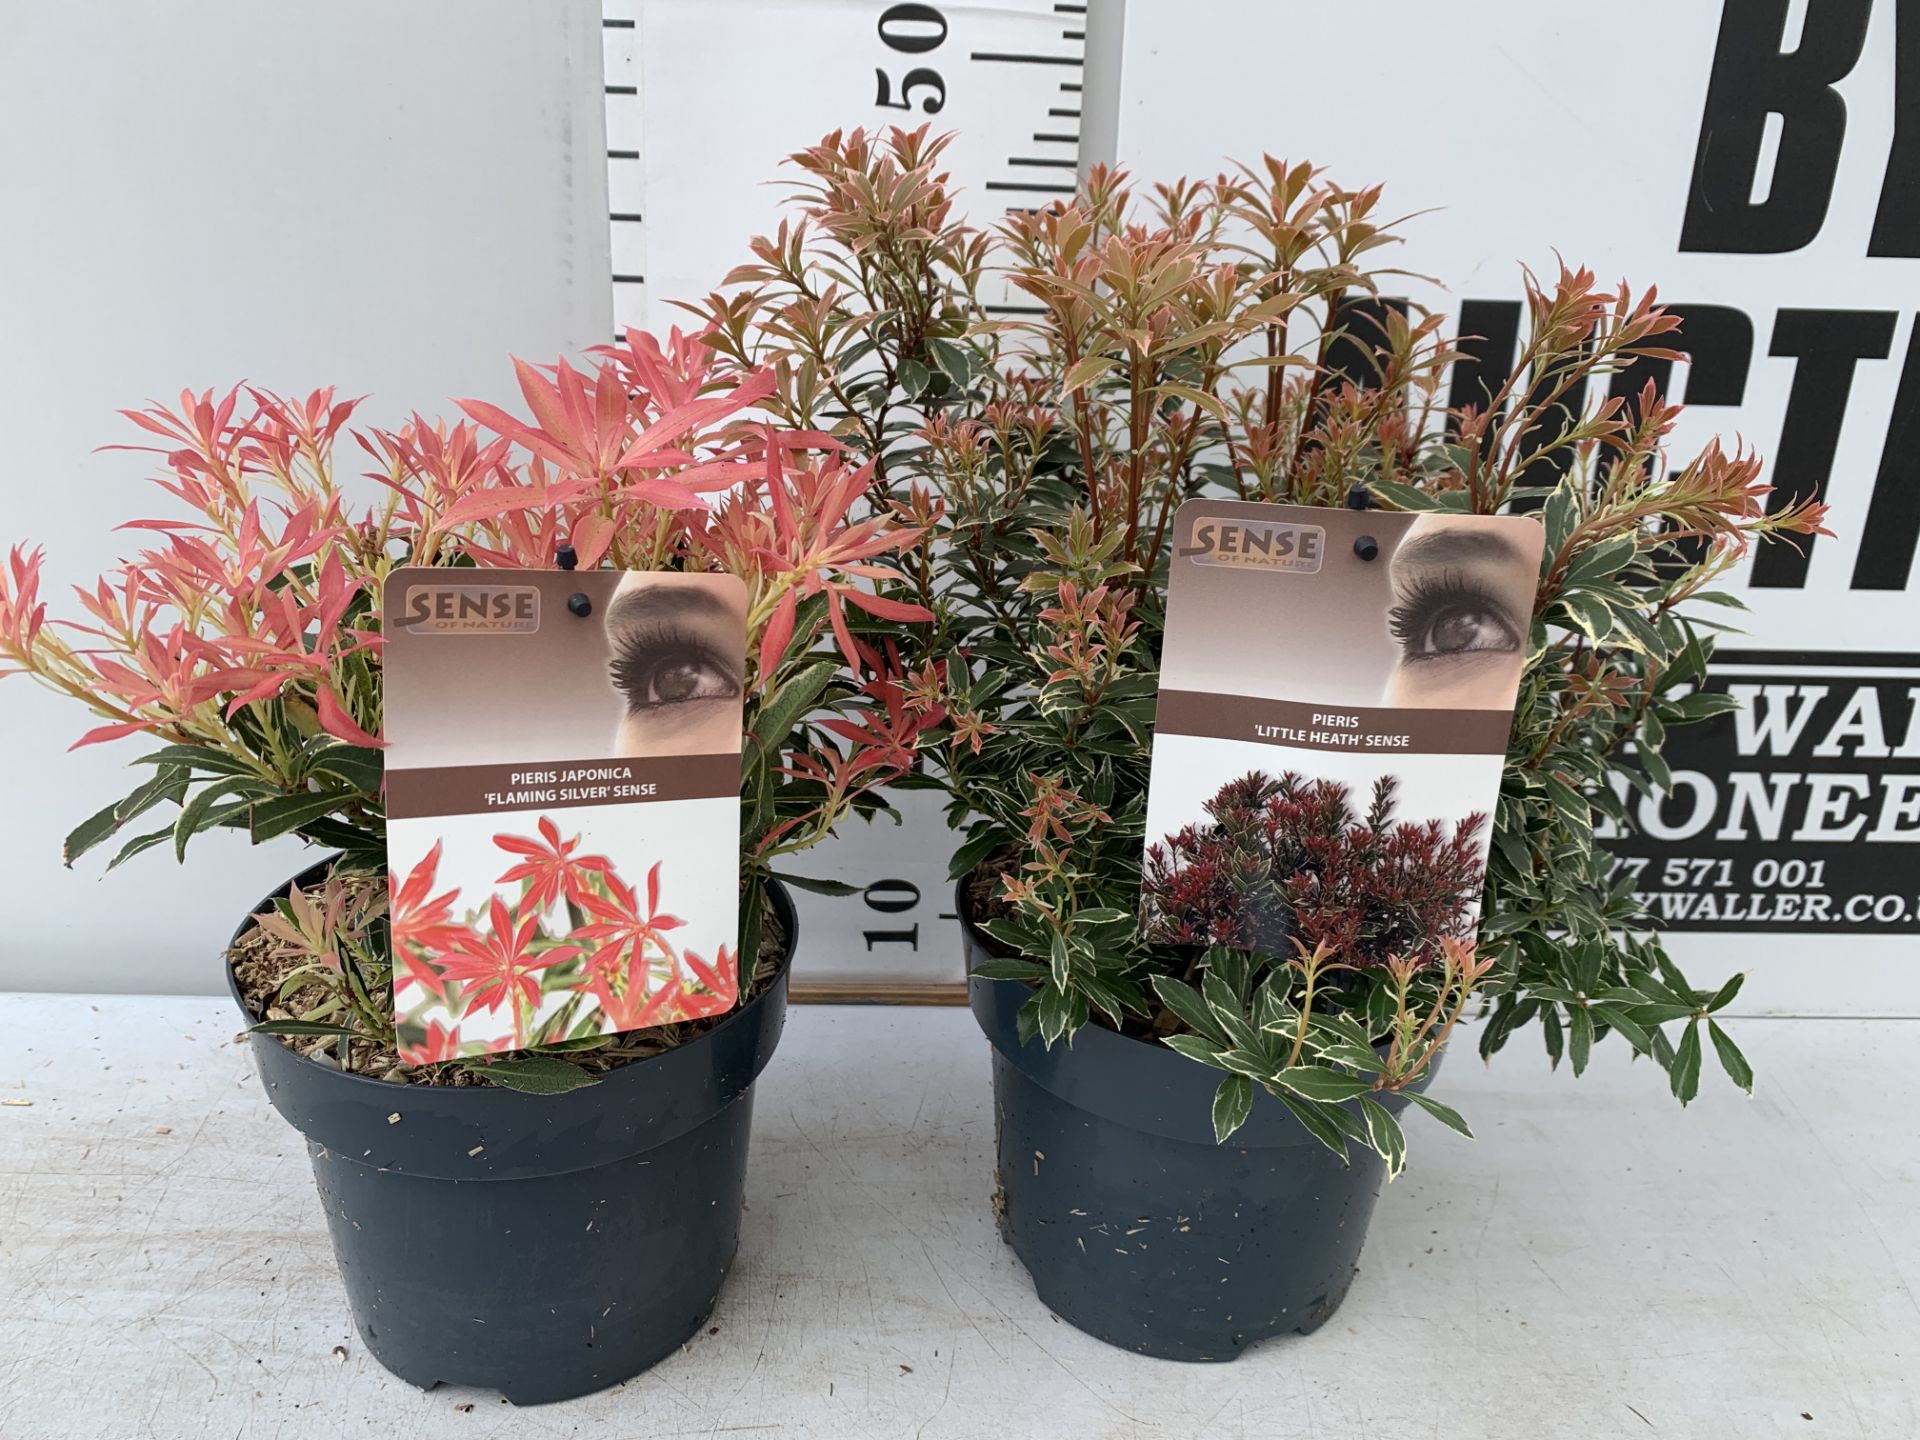 TWO PIERIS JAPONICA LITTLE HEATH AND FLAMING SILVER IN 3 LTR POTS 45CM TALL PLUS VAT TO BE SOLD - Image 5 of 10